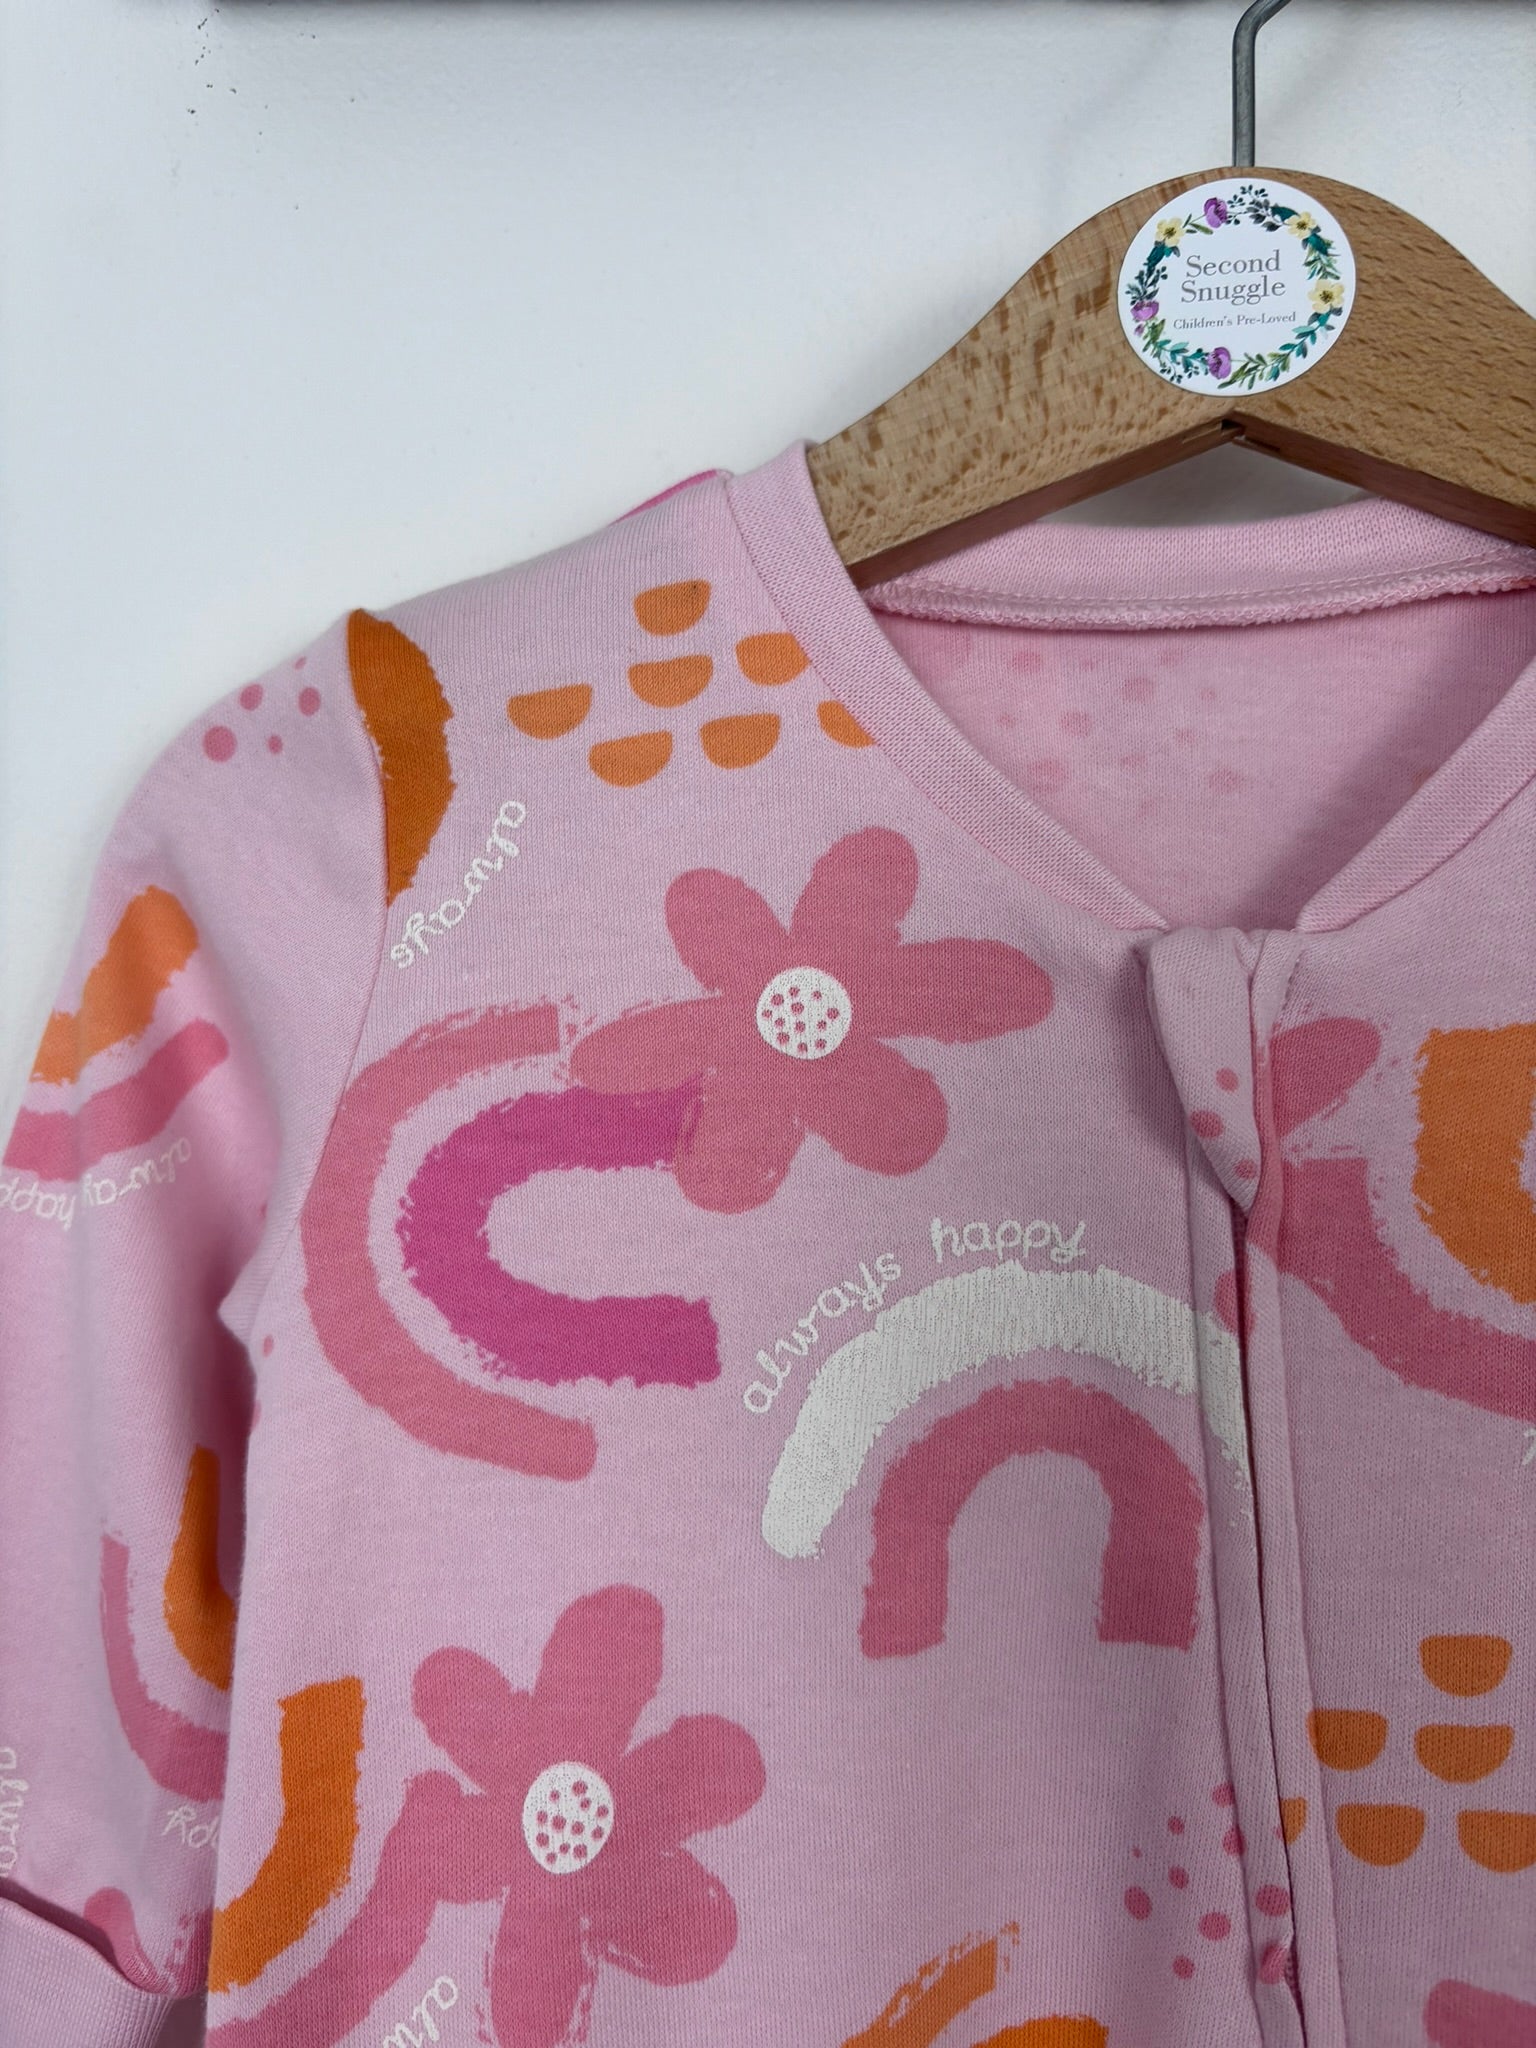 Matalan 3-6 Months-Rompers-Second Snuggle Preloved